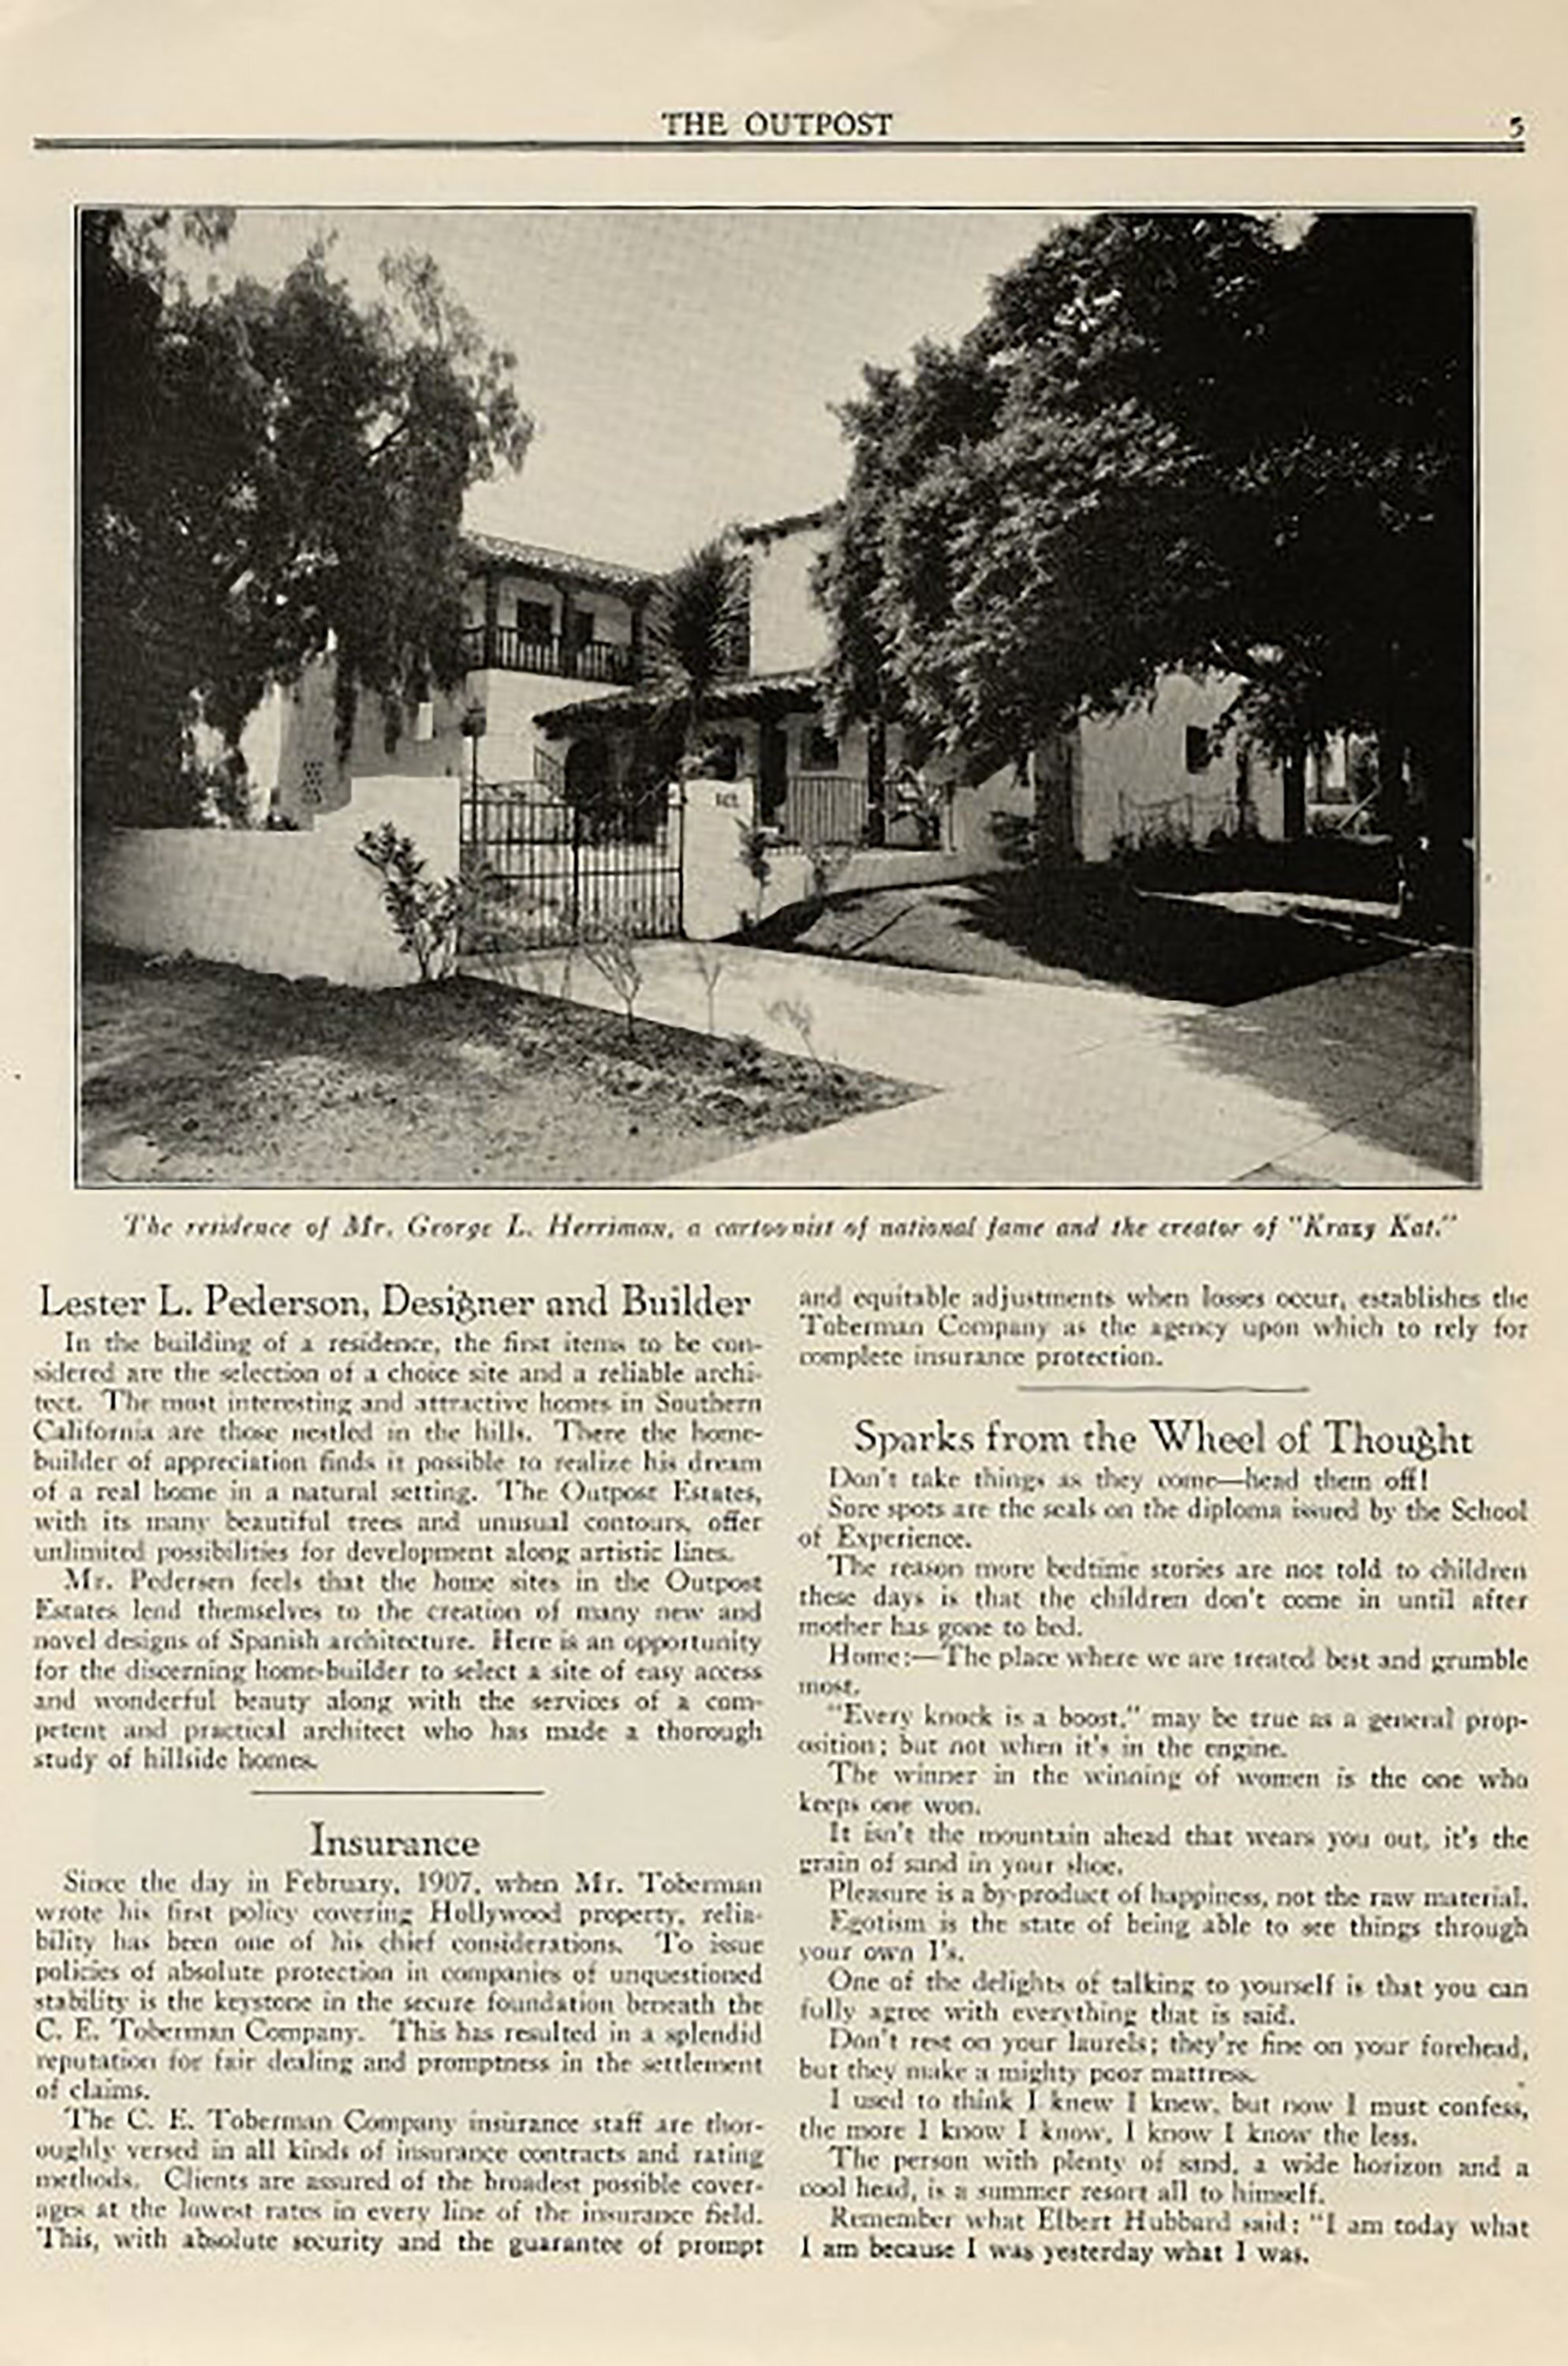 20-page-from-the-outpost-promotional-magazine-with-herriman-house.jpg